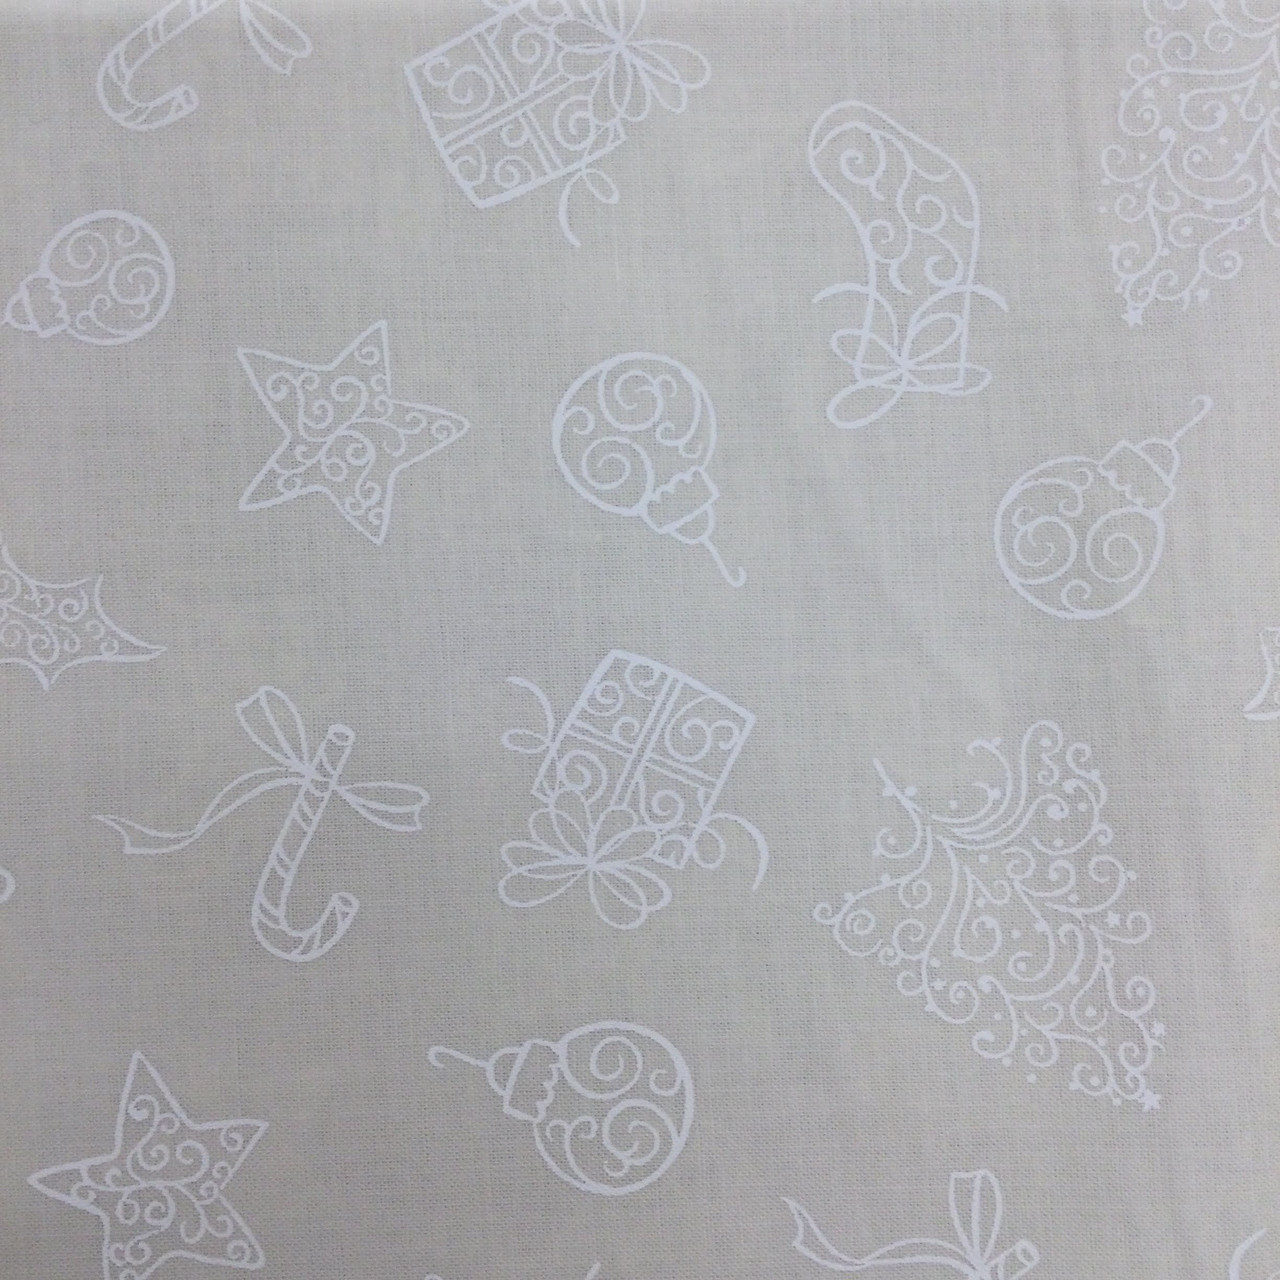 Muslin Fabric Natural 100% Cotton, 60 Inches Wide, by the Yard 